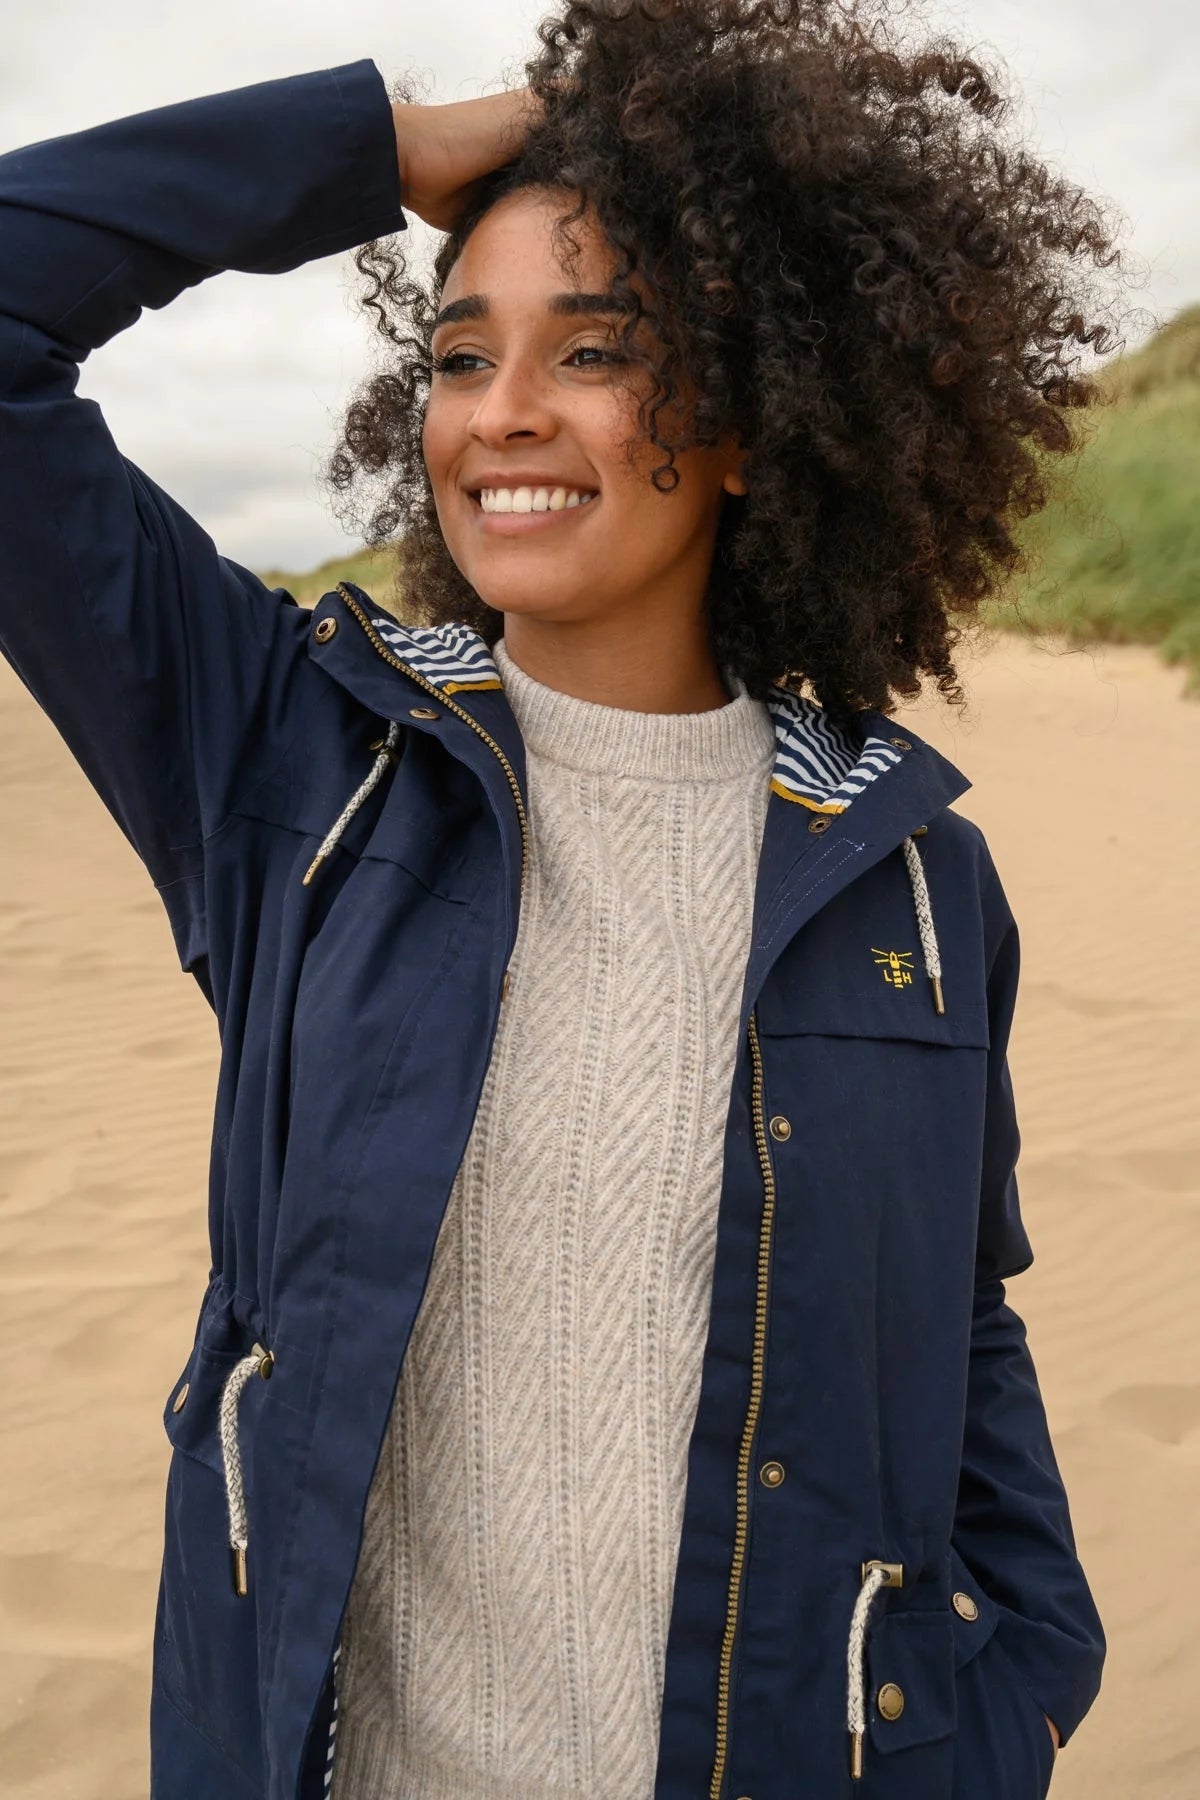 A waterproof womens rain jacket from Lighthouse in navy.